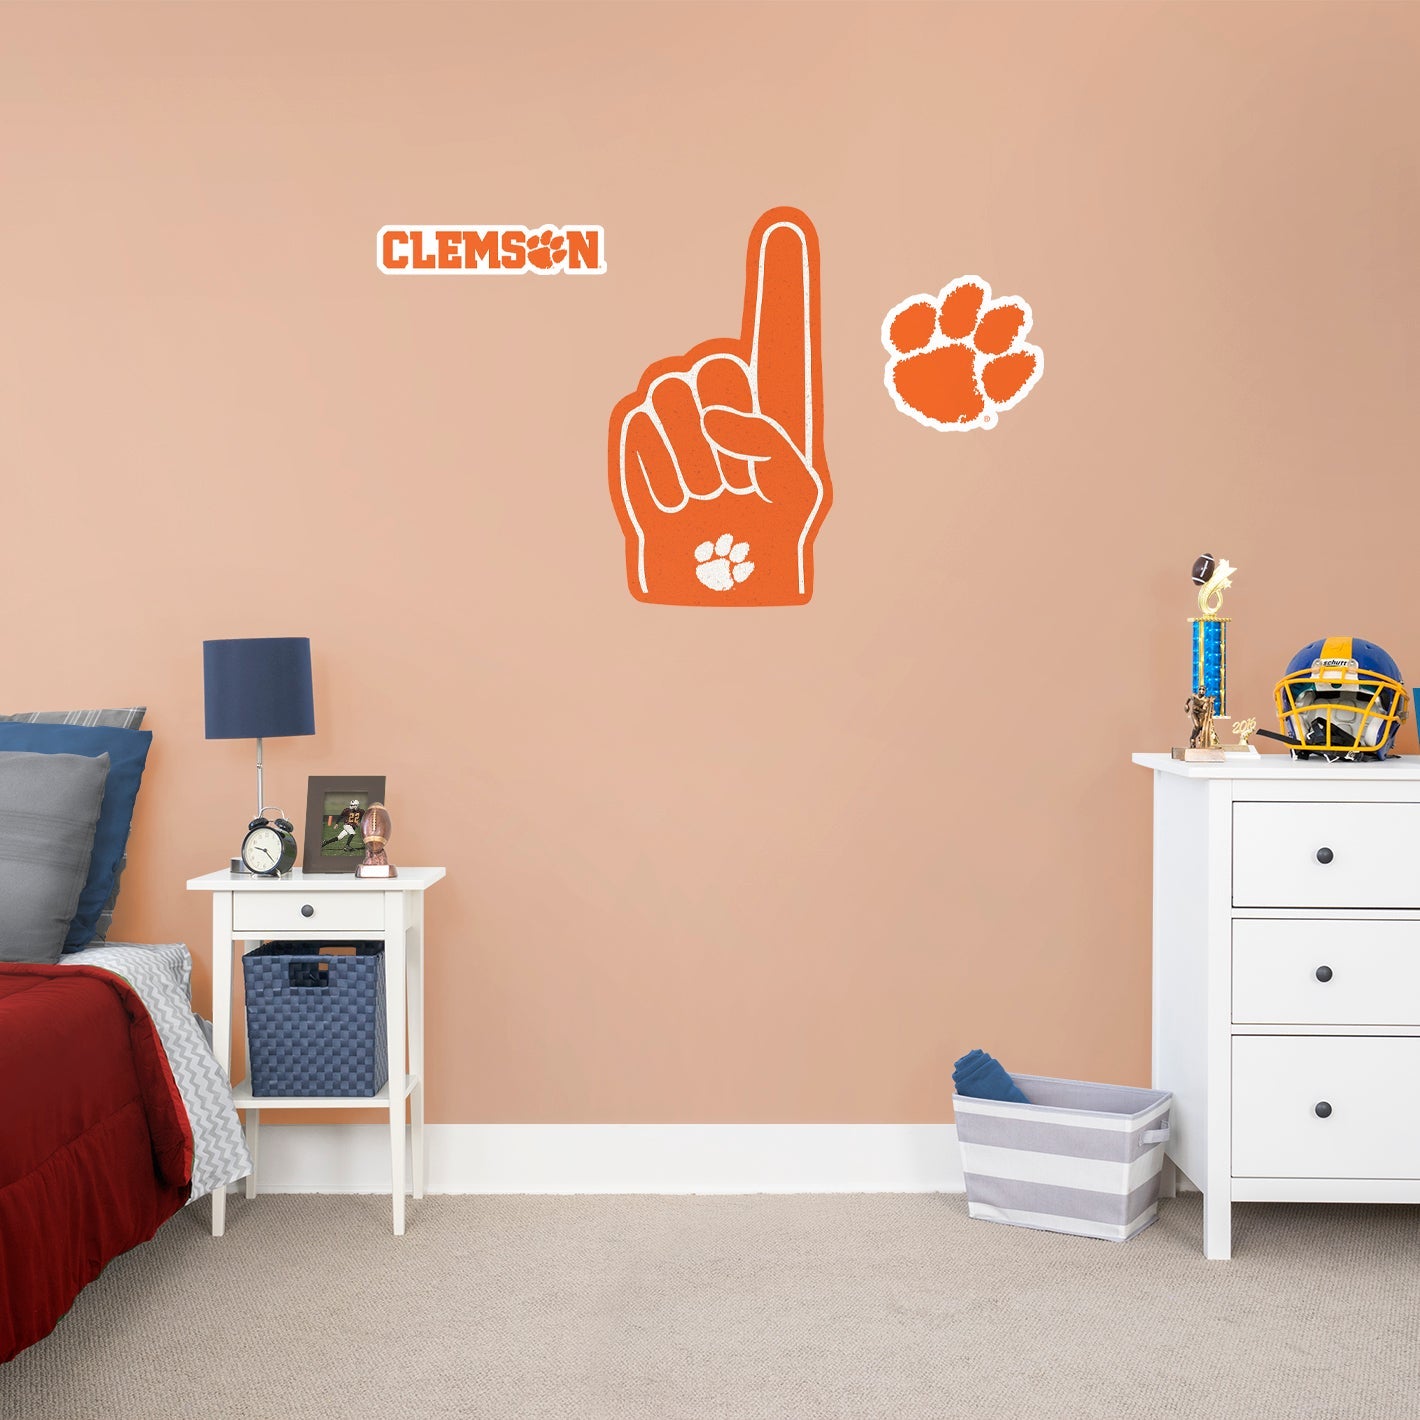 Clemson Tigers:    Foam Finger        - Officially Licensed NCAA Removable     Adhesive Decal